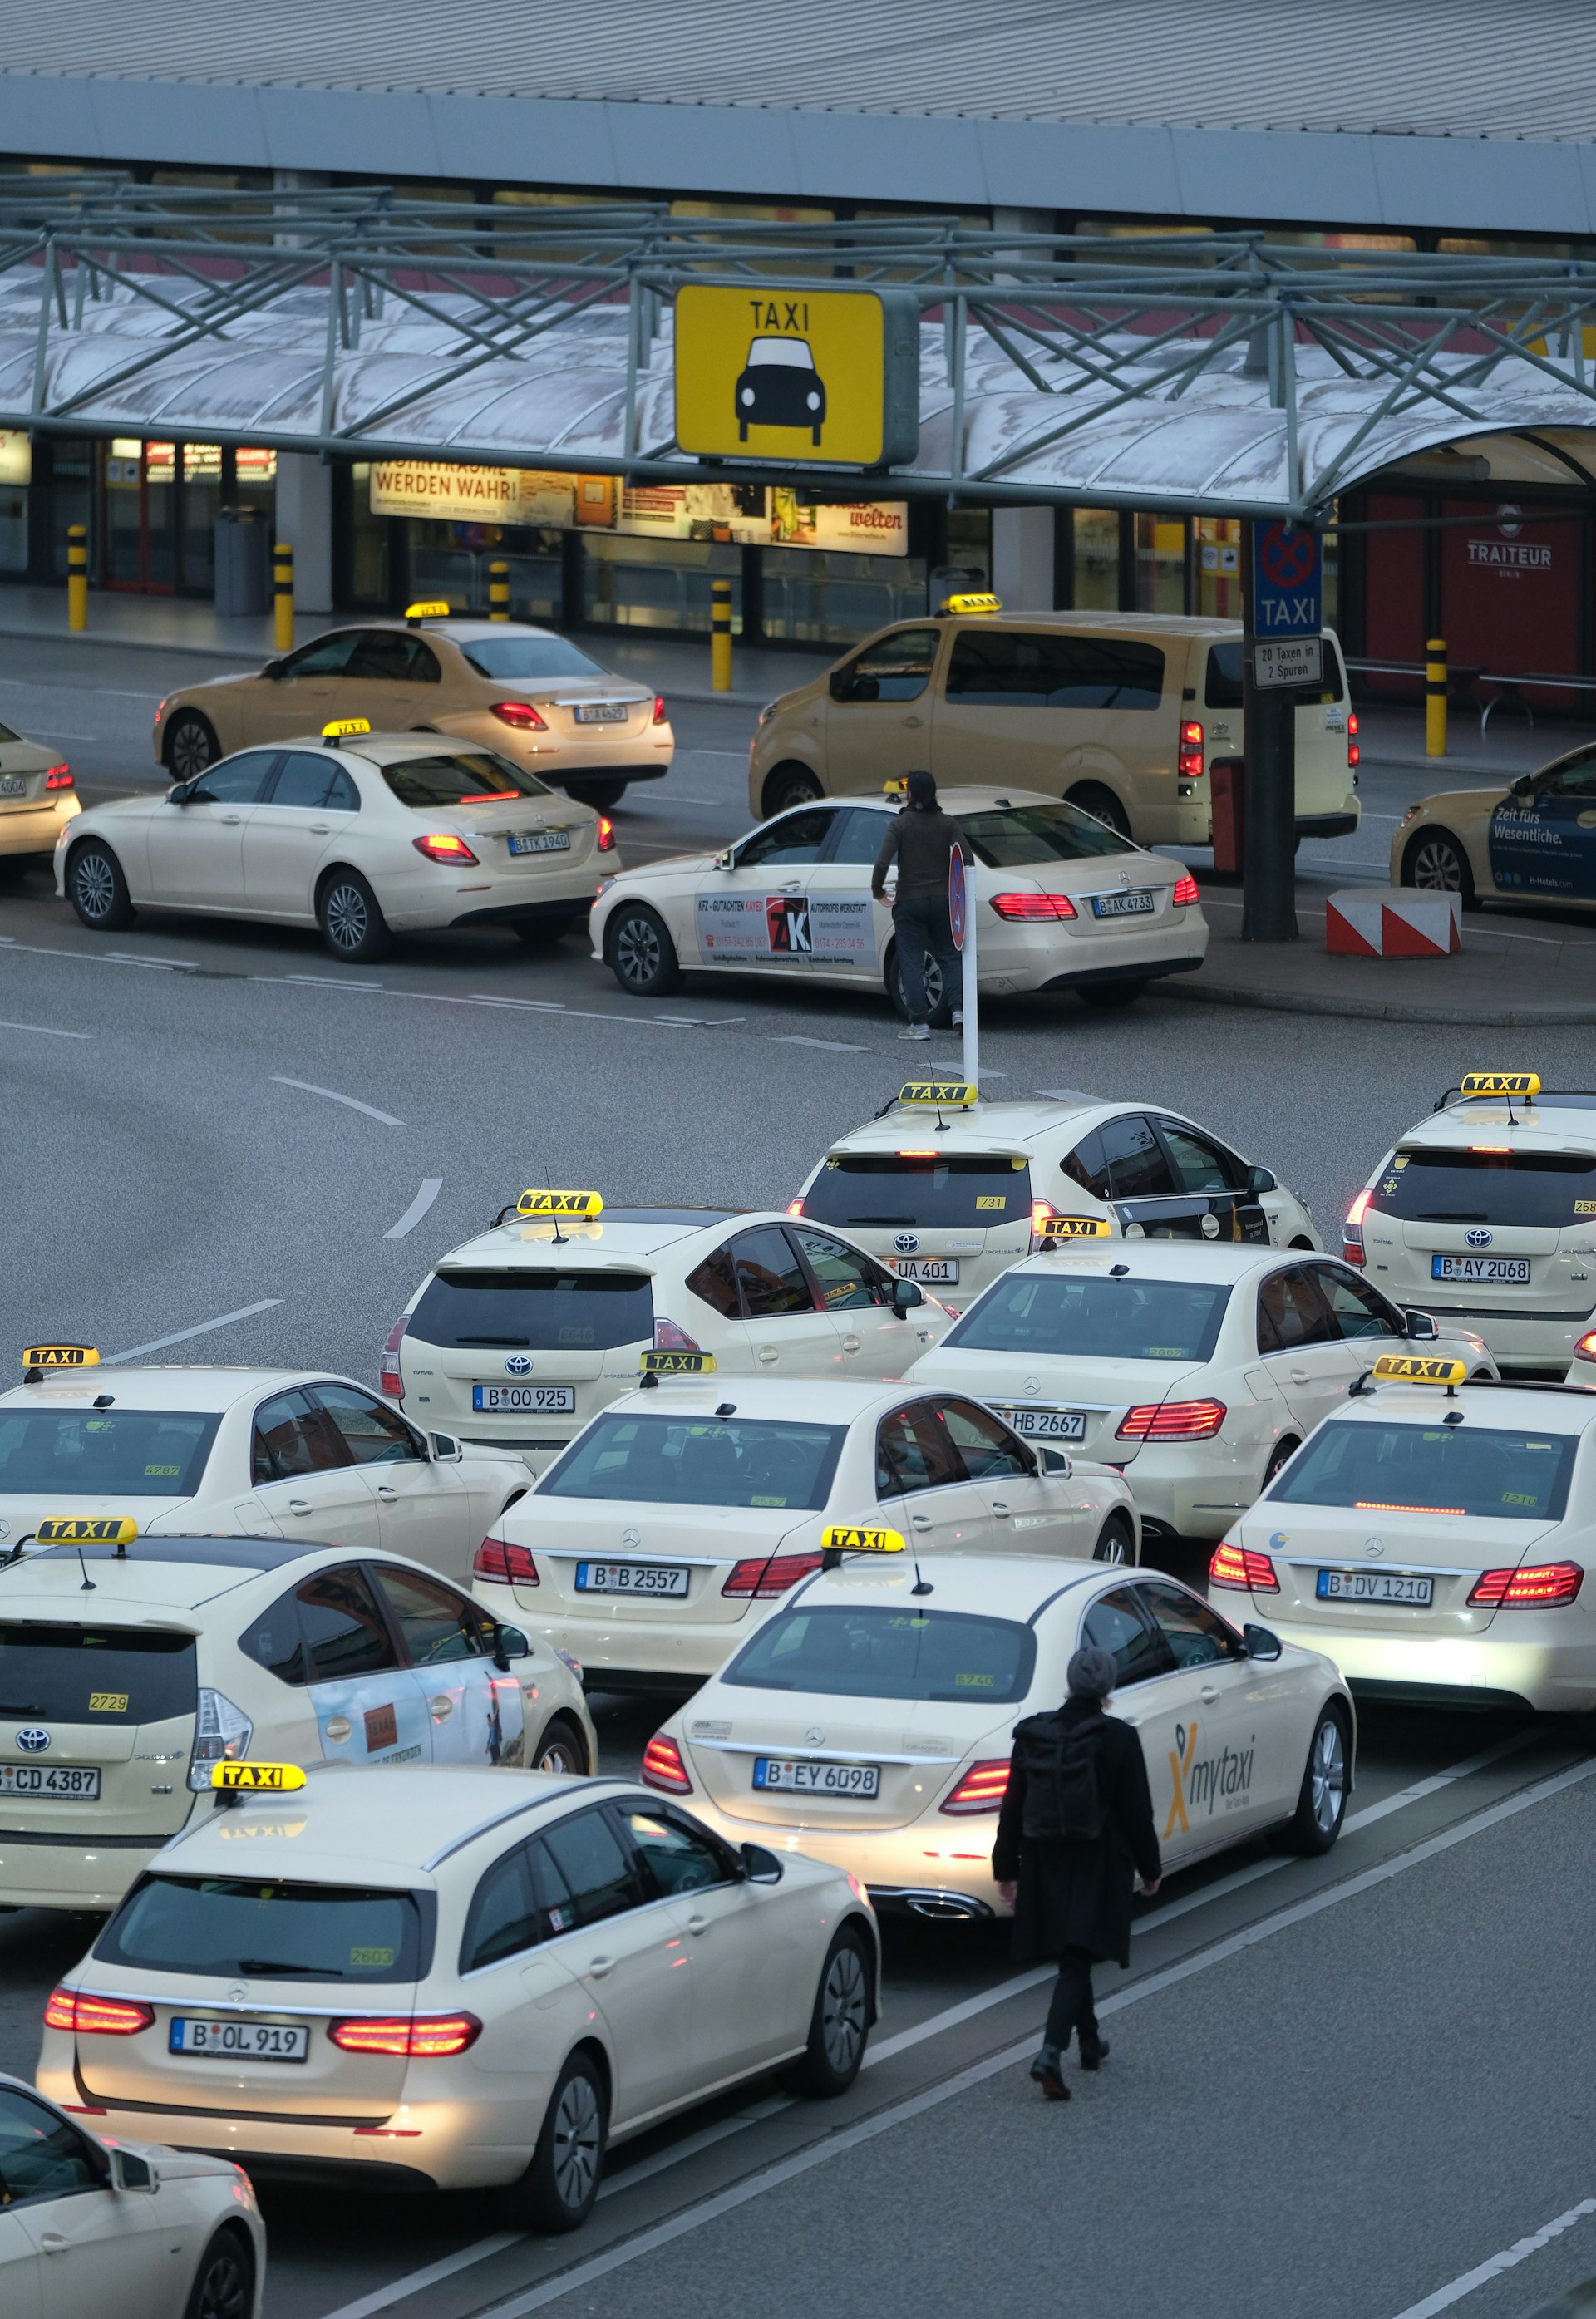 Taxis wait for passengers at Tegel Airport in Berlin, Germany